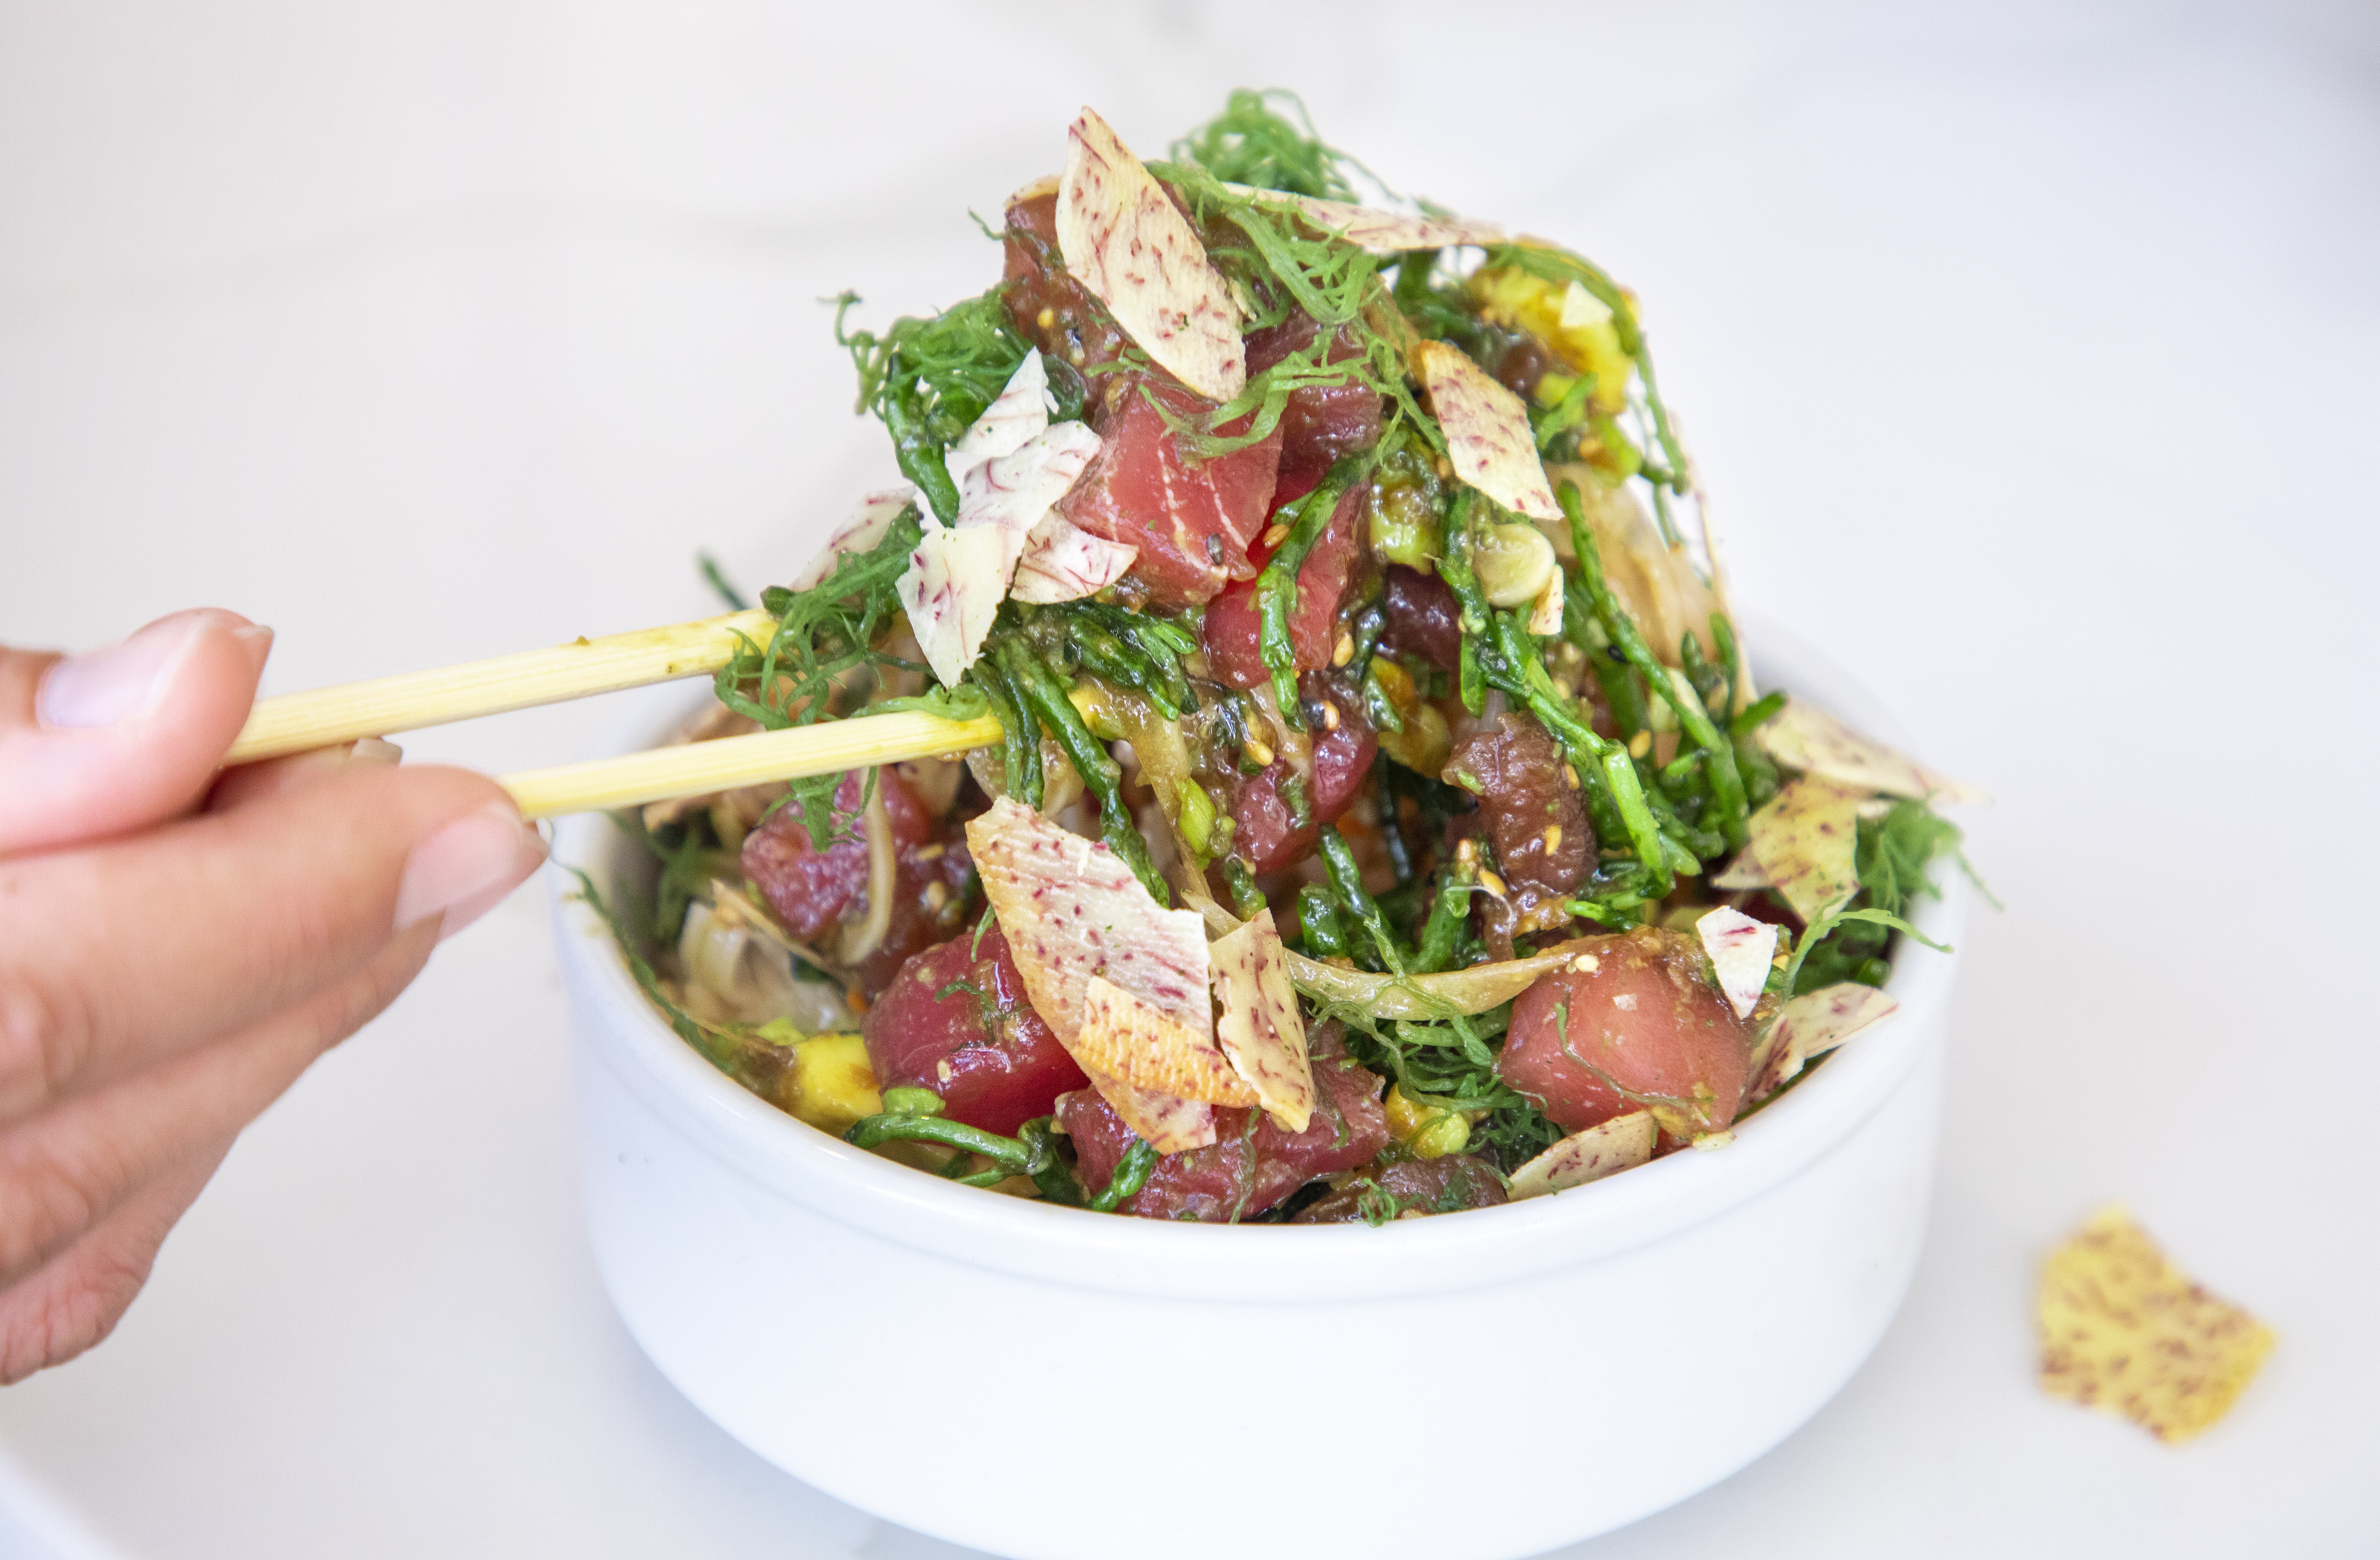 Feature image forMerriman's collaborates with Sweetfin Poke of Southern California on exclusive poke bowl